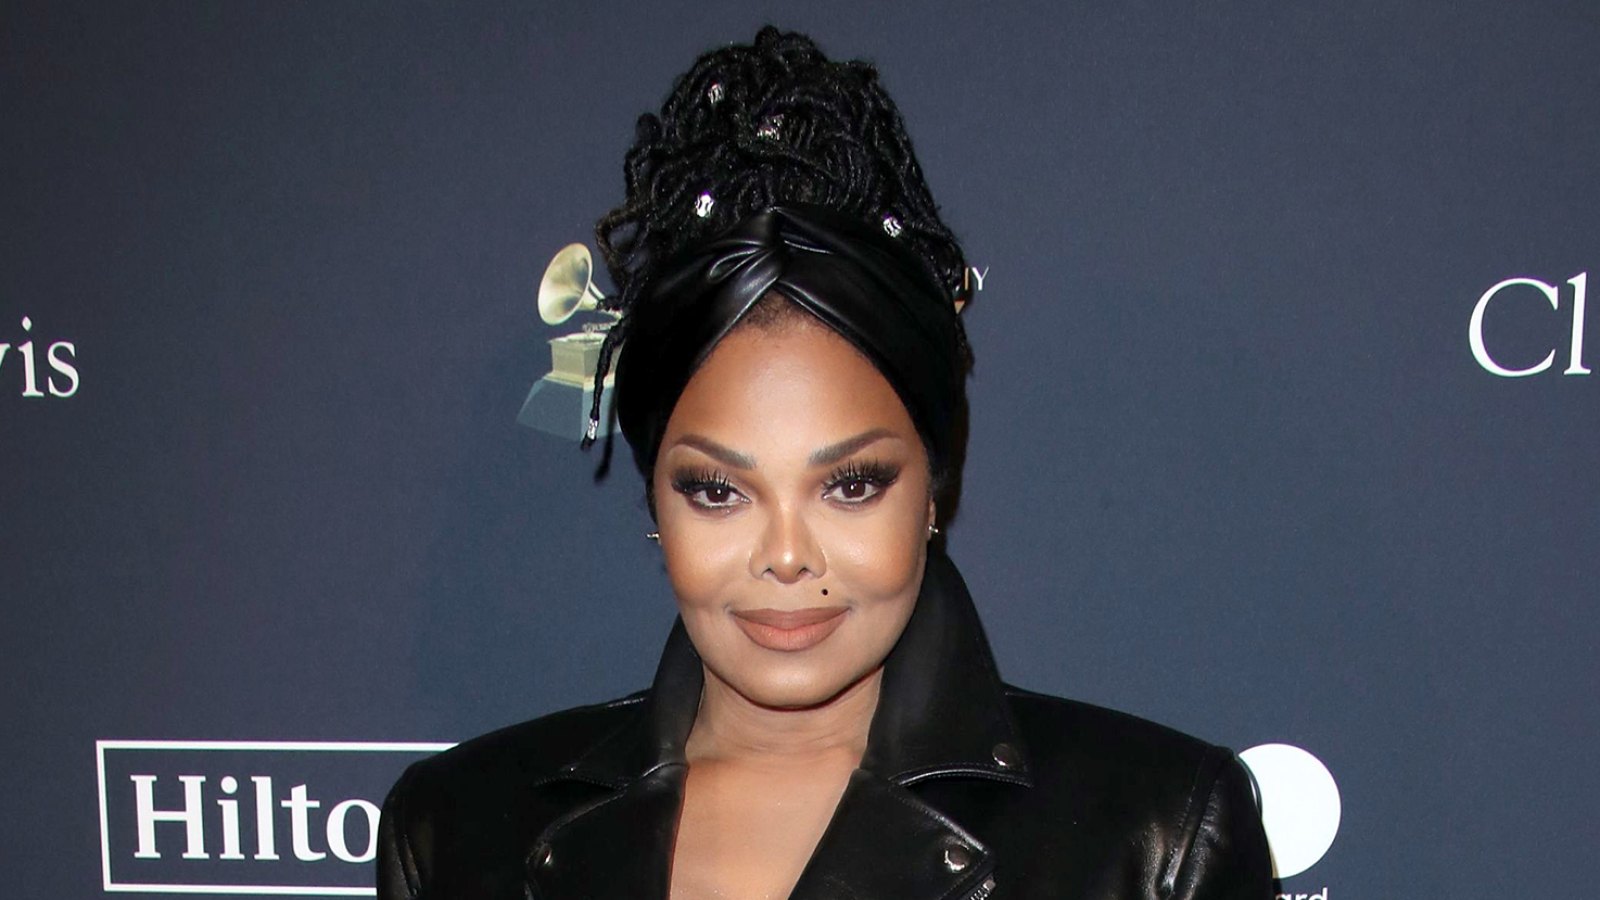 Janet Jackson Wants to Age Gracefully But She Isn’t Opposed to a Little Bit of Zhuzh